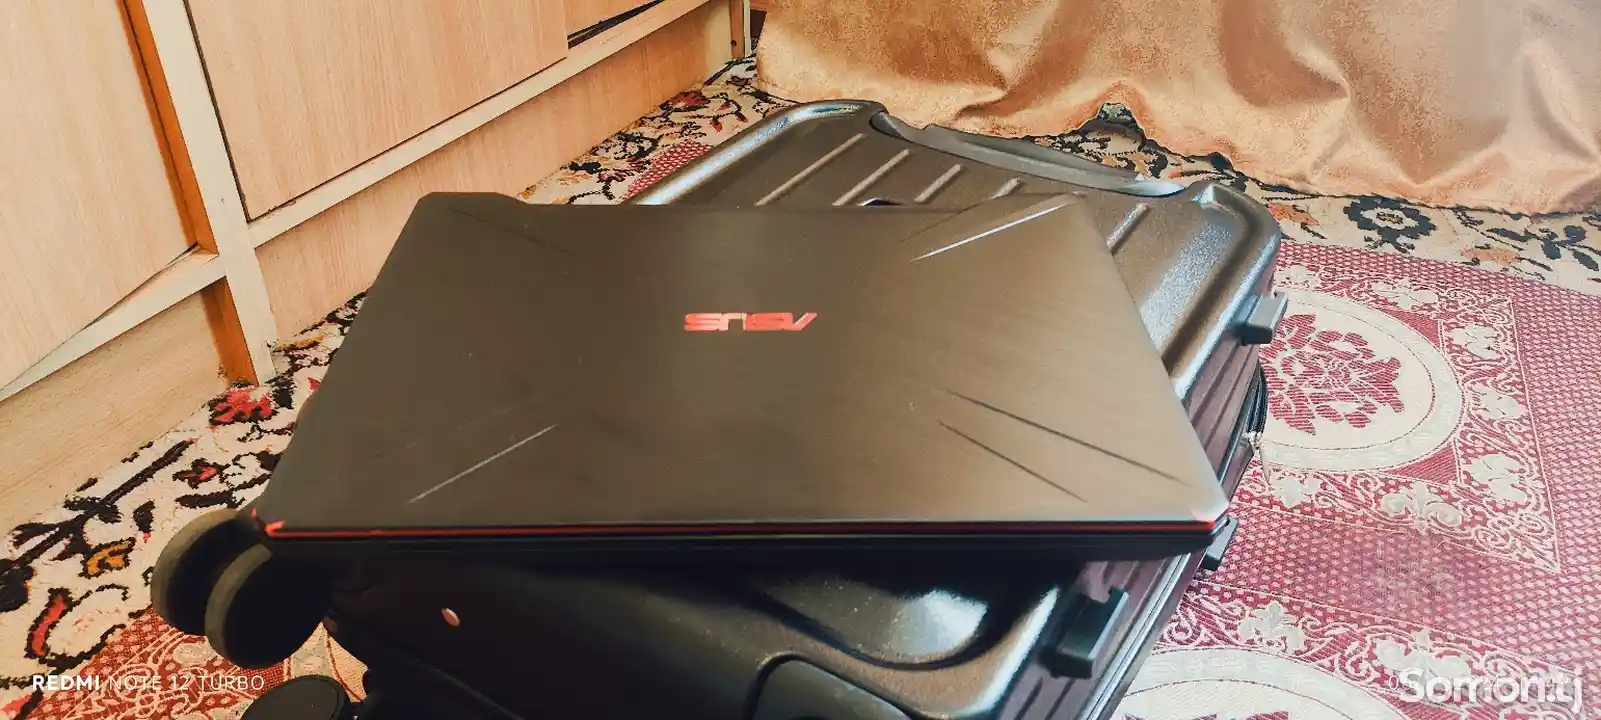 Ноутбук Asus Flying Fortress 6 TUF Gaming-4